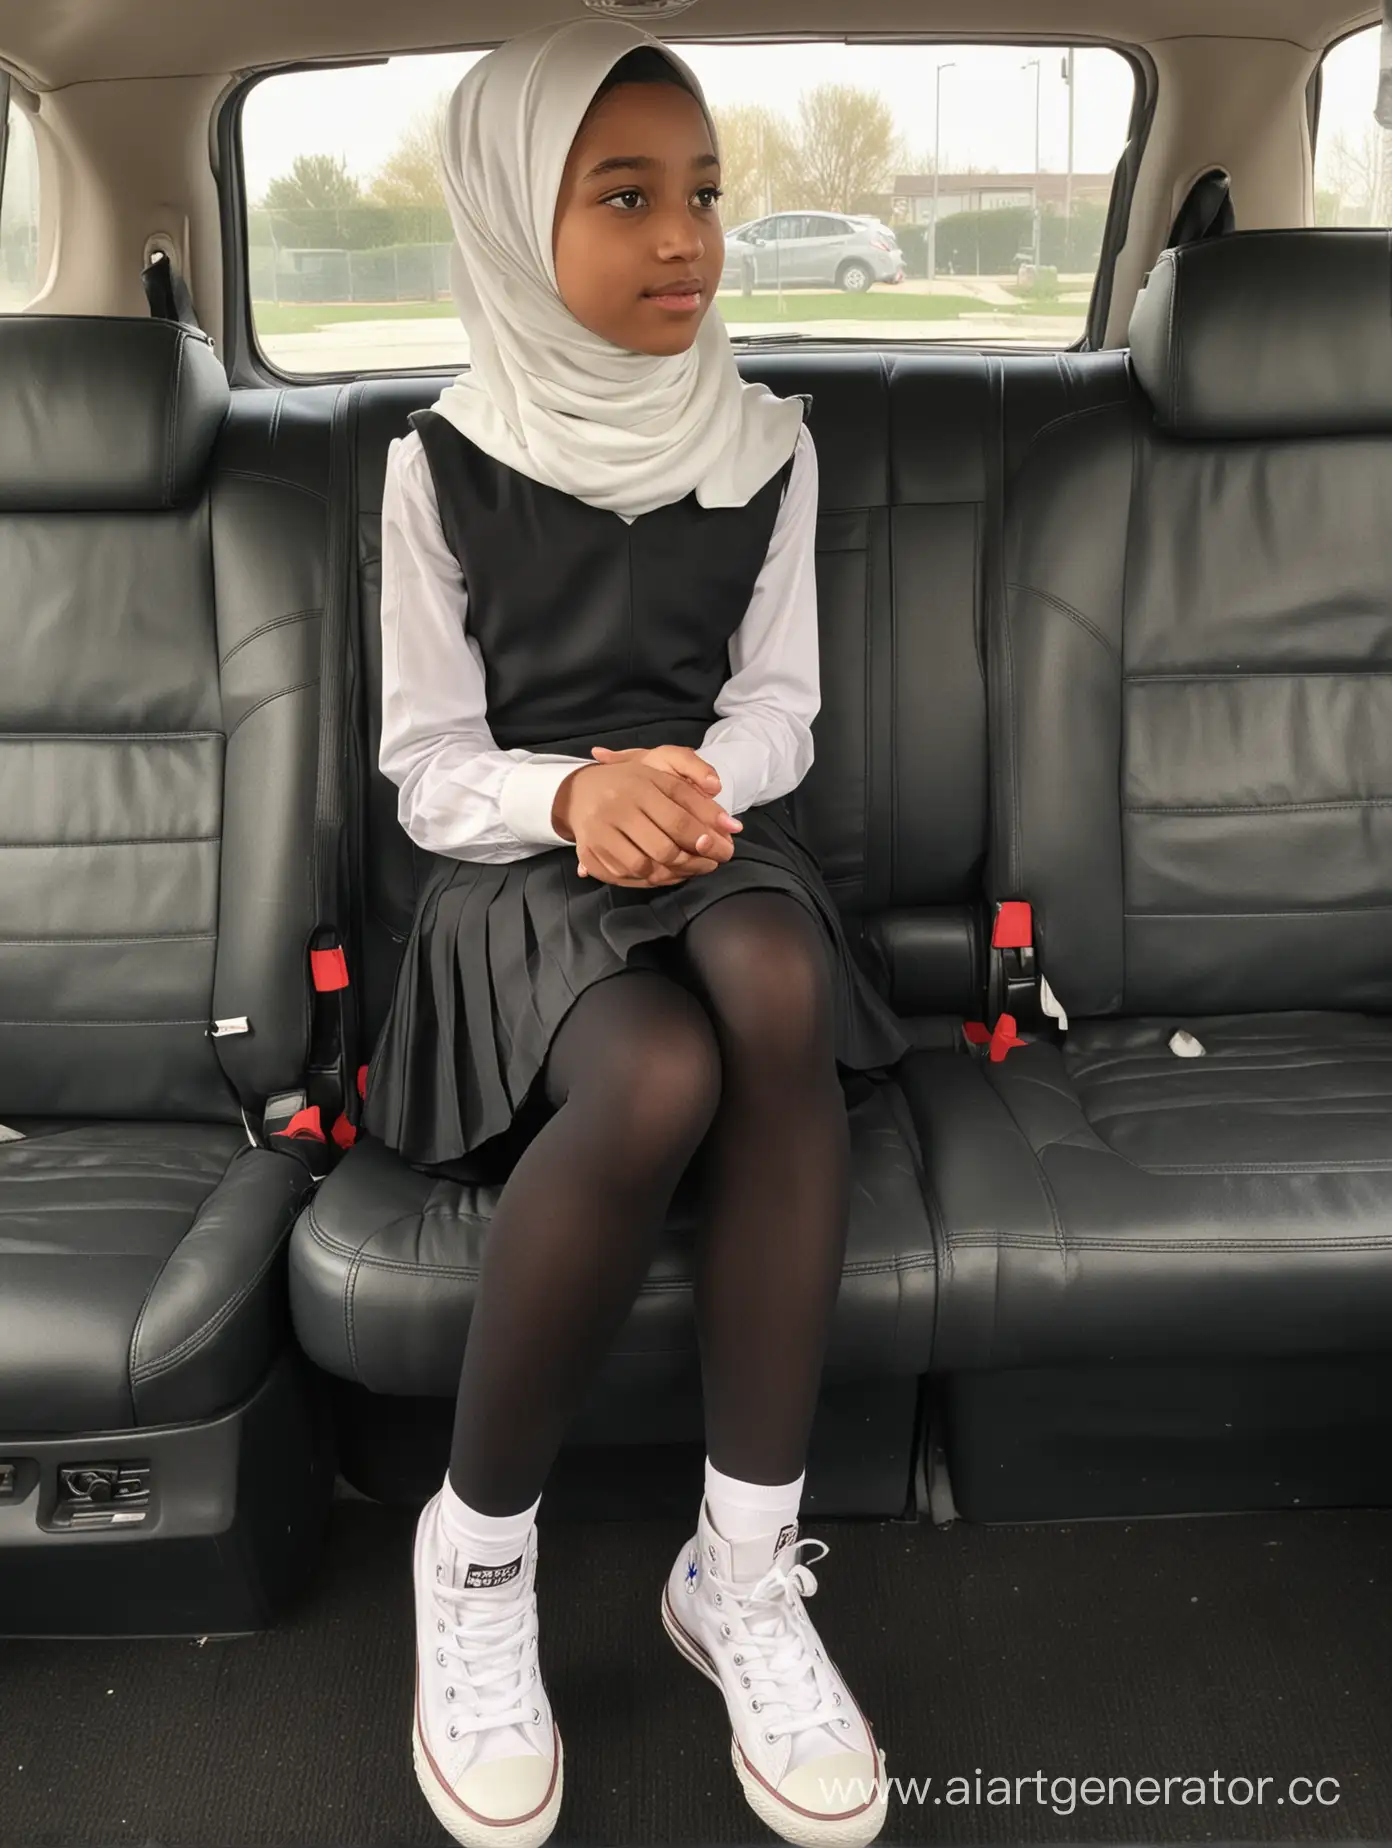 A little girl, 12 years old, hijab, mini school skirt, white short converse shoes, school uniform, black opaque tights, sits car seat, from side, top view